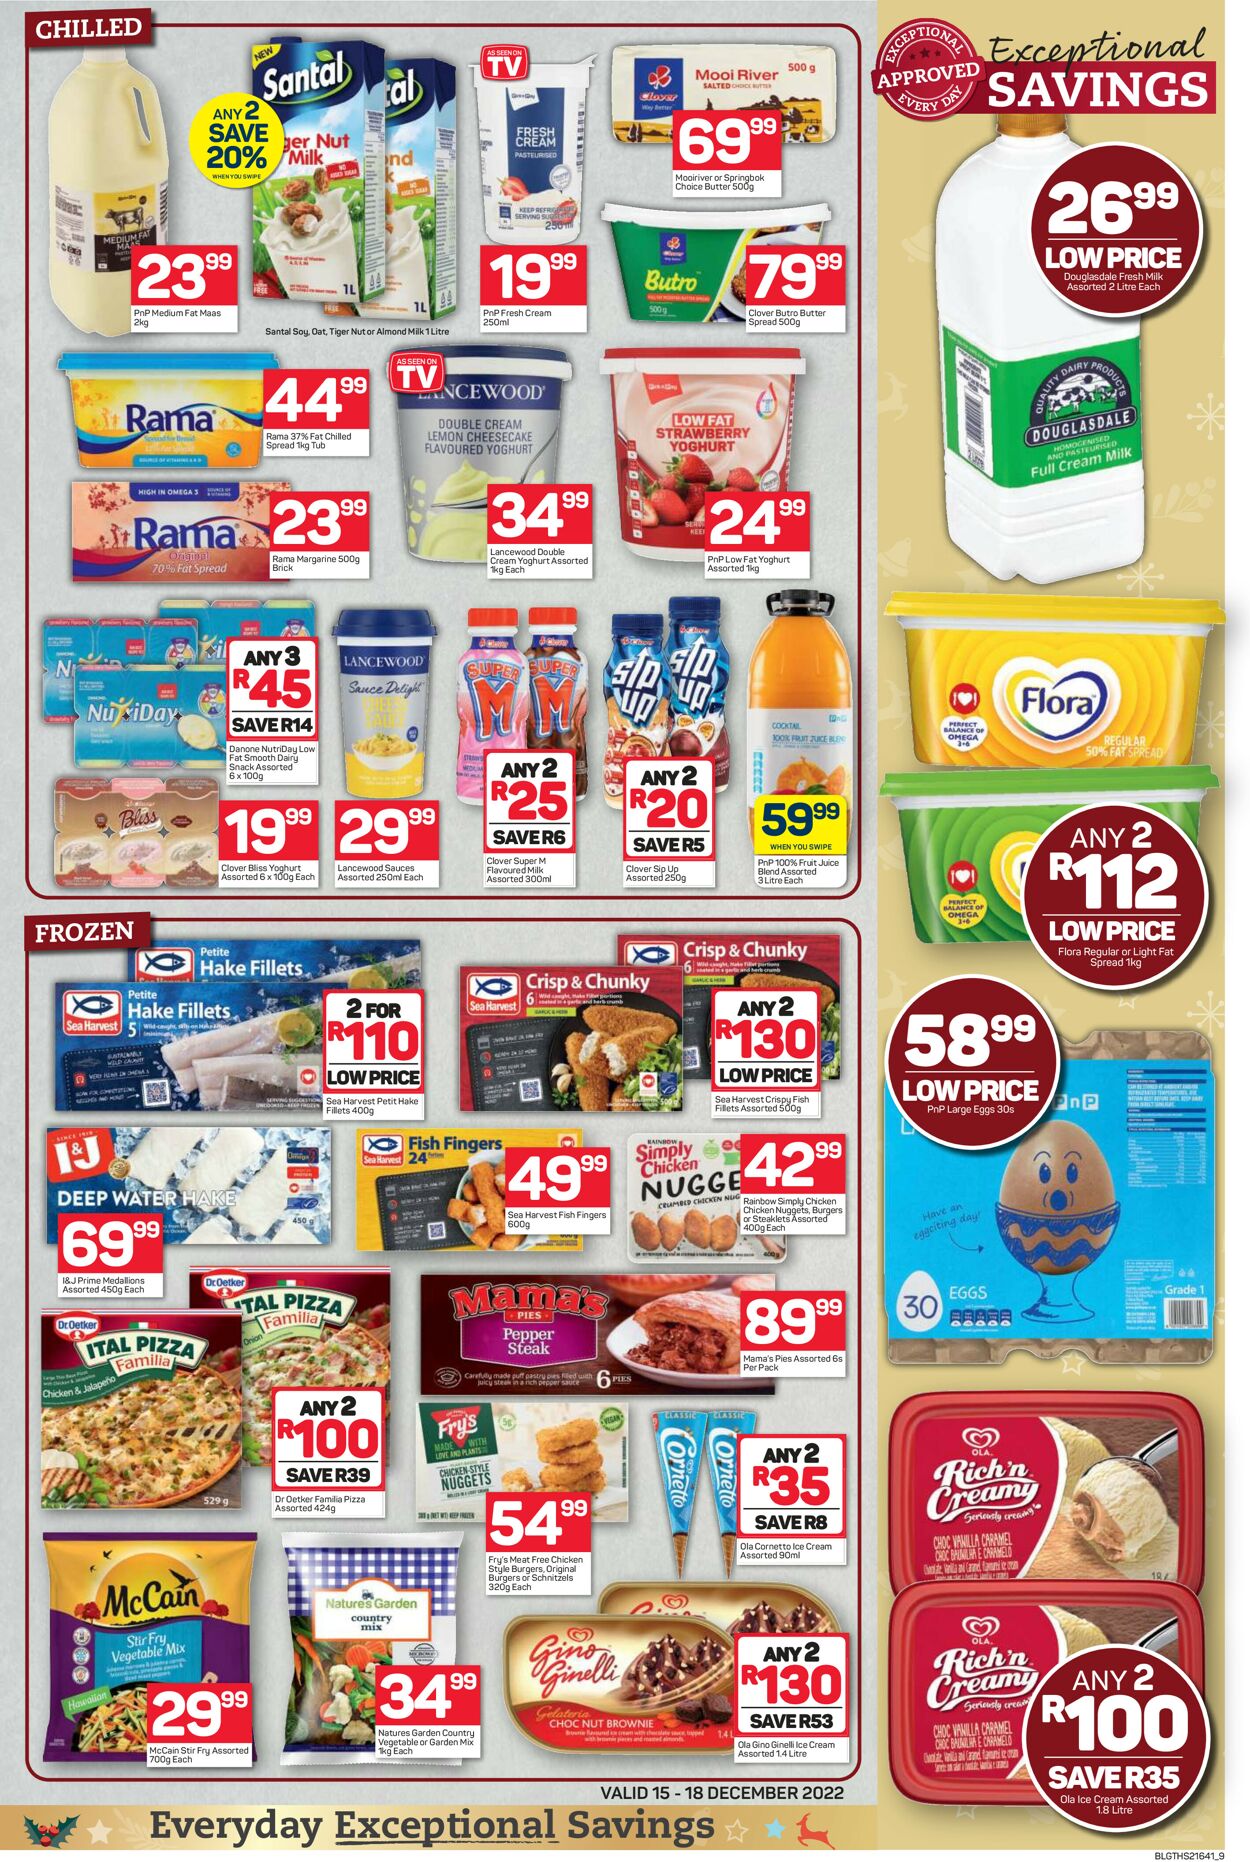 Pick n Pay Catalogue - 2022/12/15-2022/12/18 (Page 9)